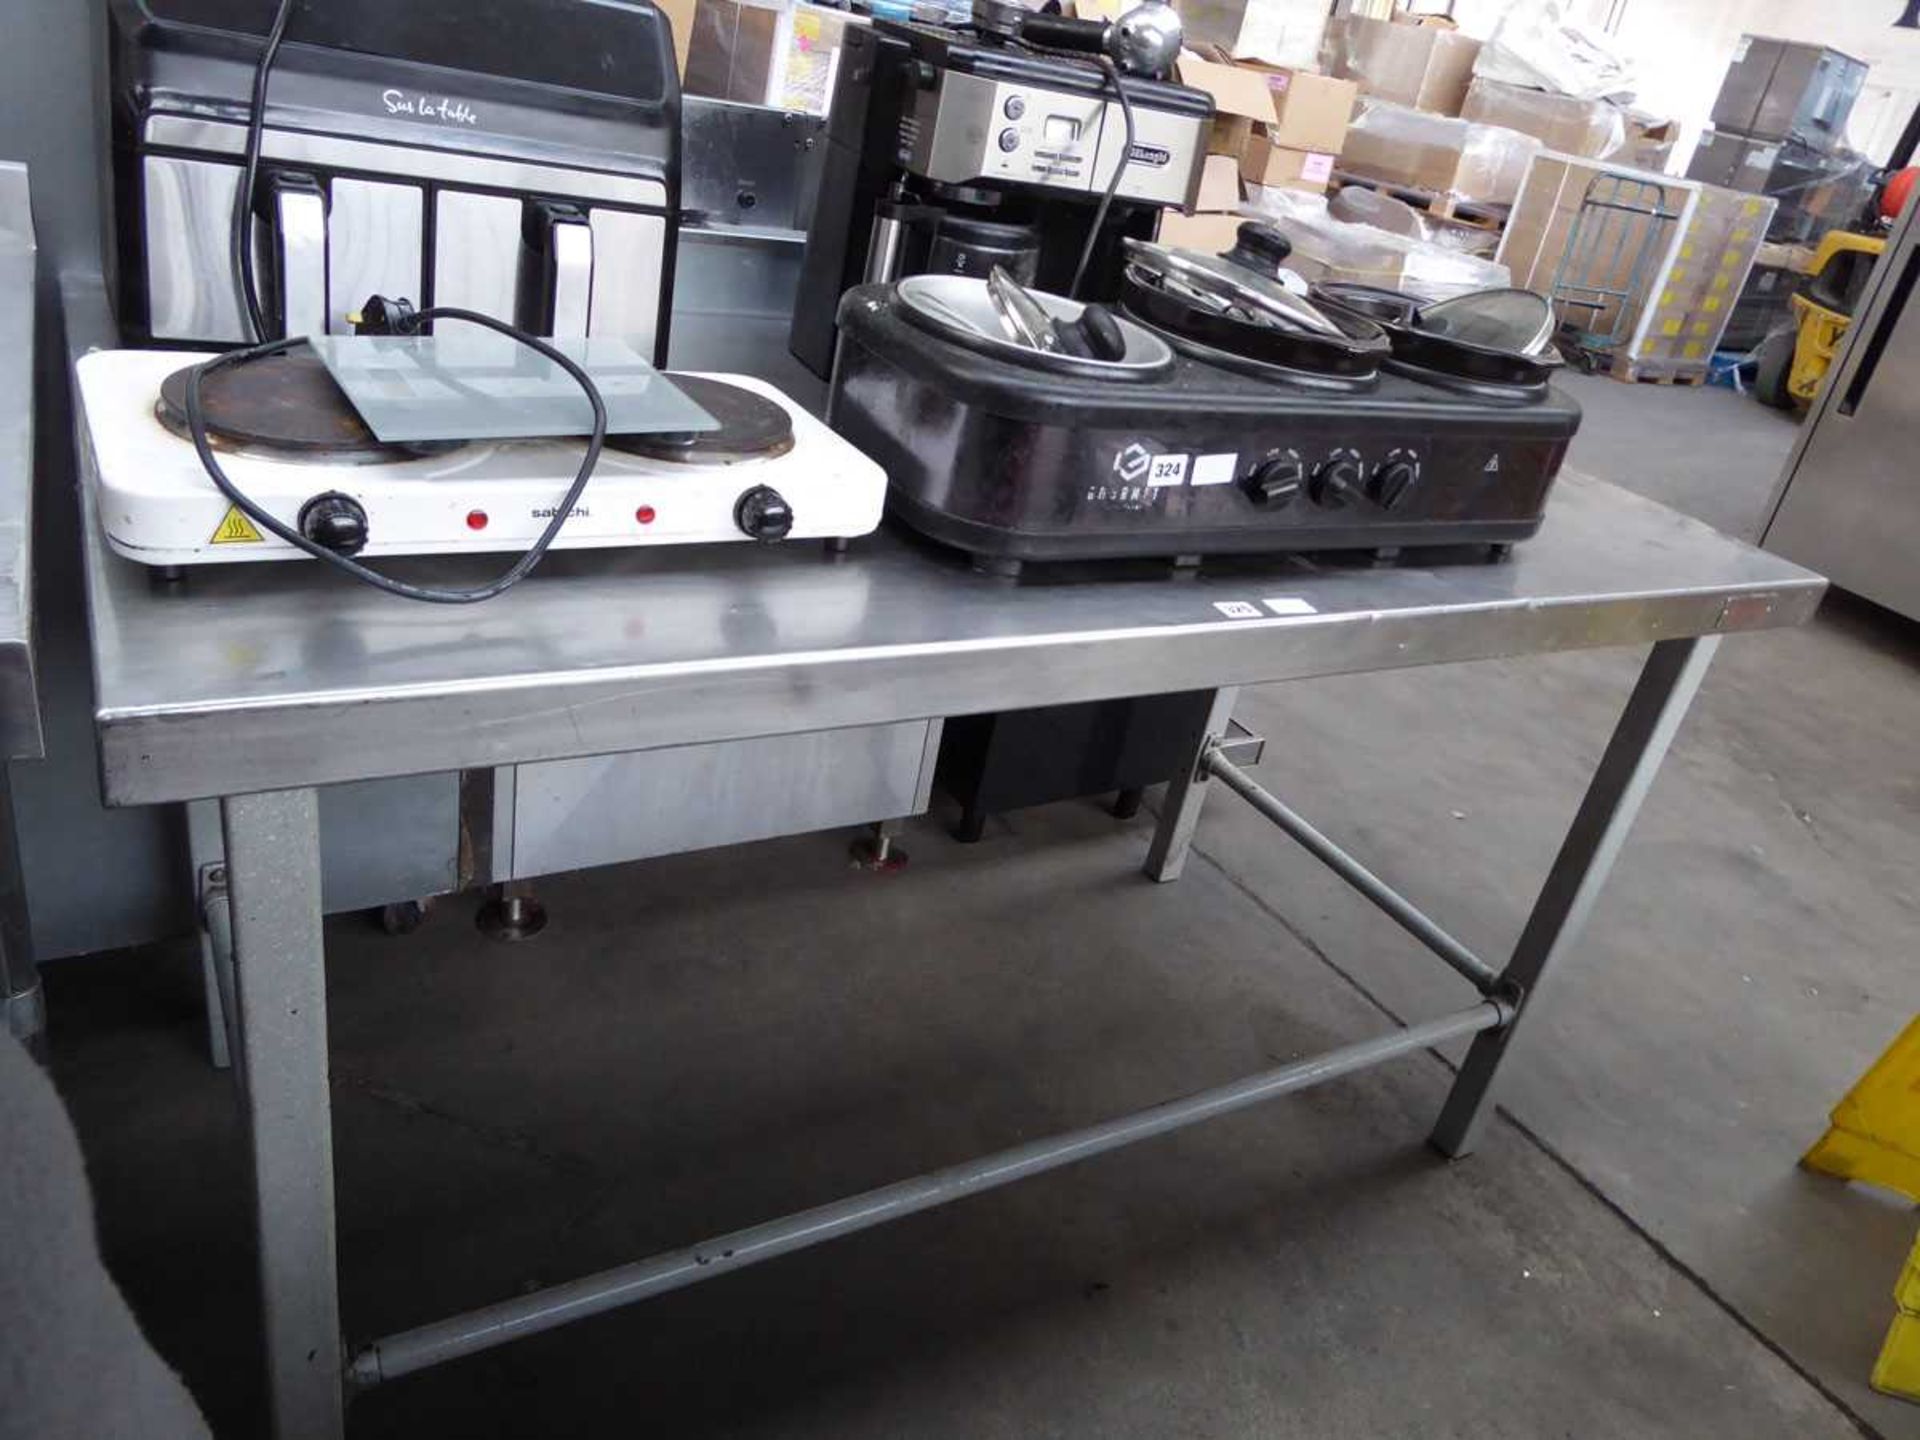 152cm stainless steel topped preparation table